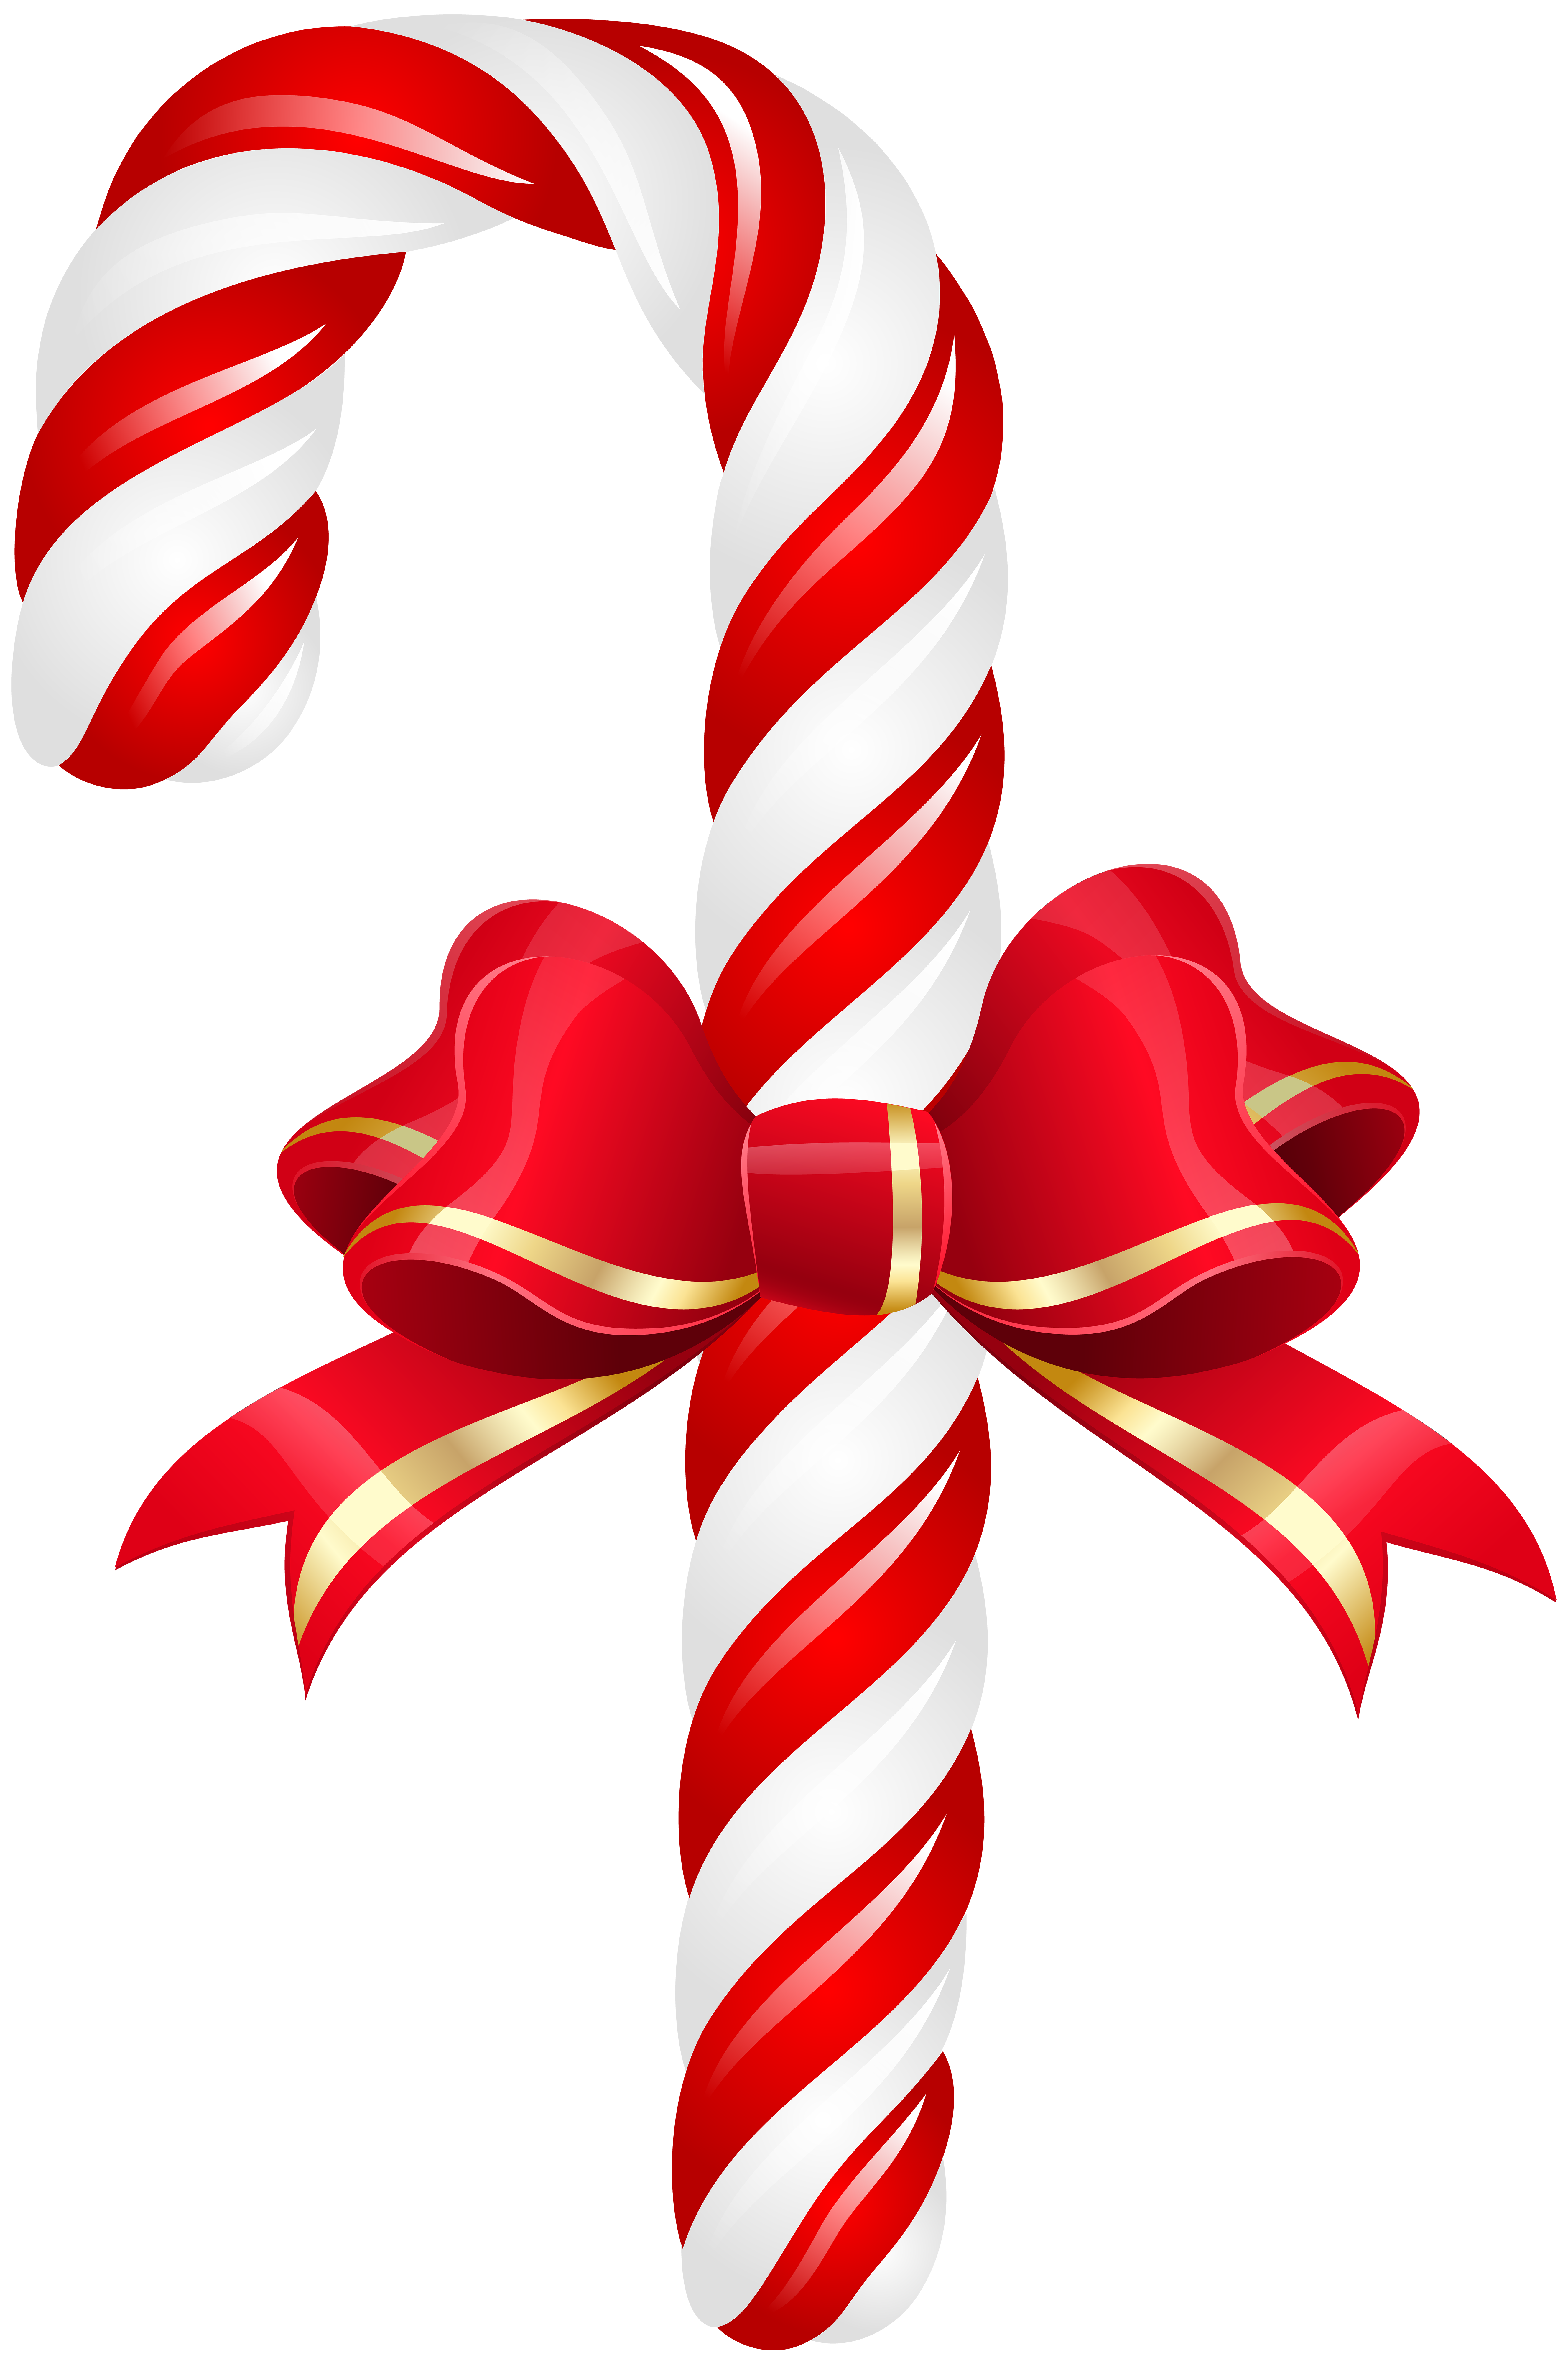 Candy Cane with Bow Clip Art Image.